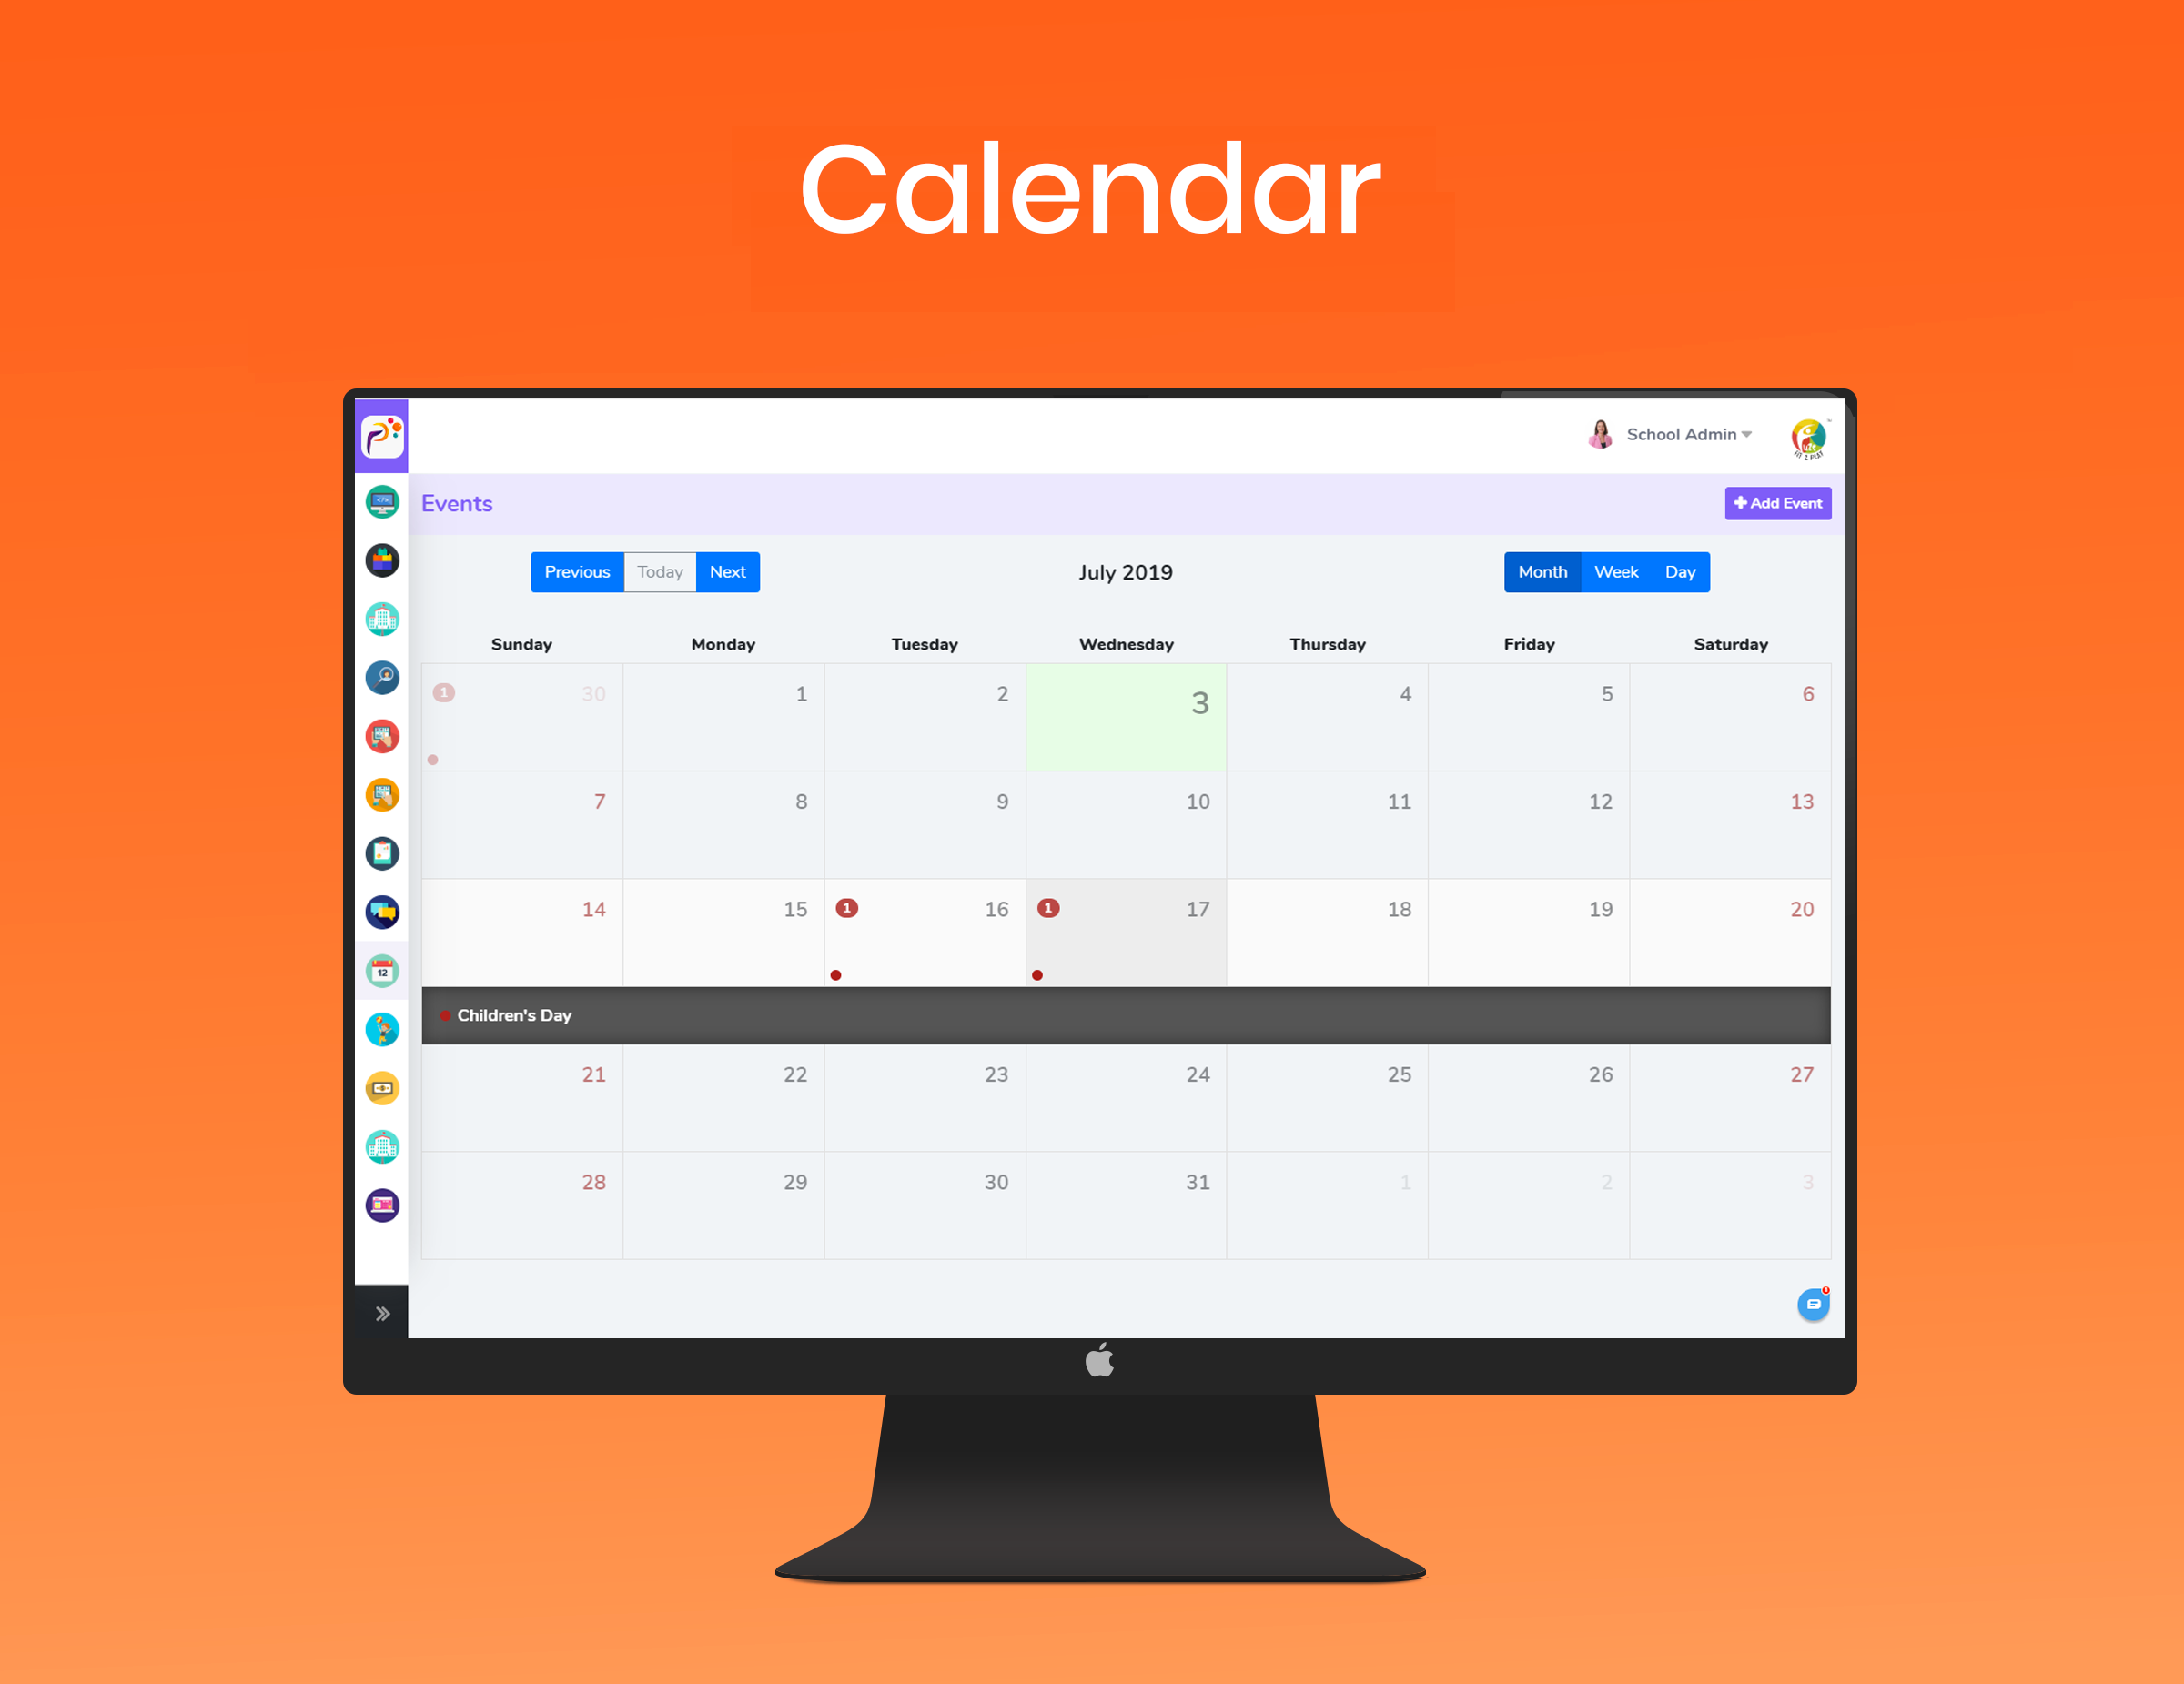 PREto3 Software - Schedule events for groups and teams. Share, edit, and send notifications. All in one app!